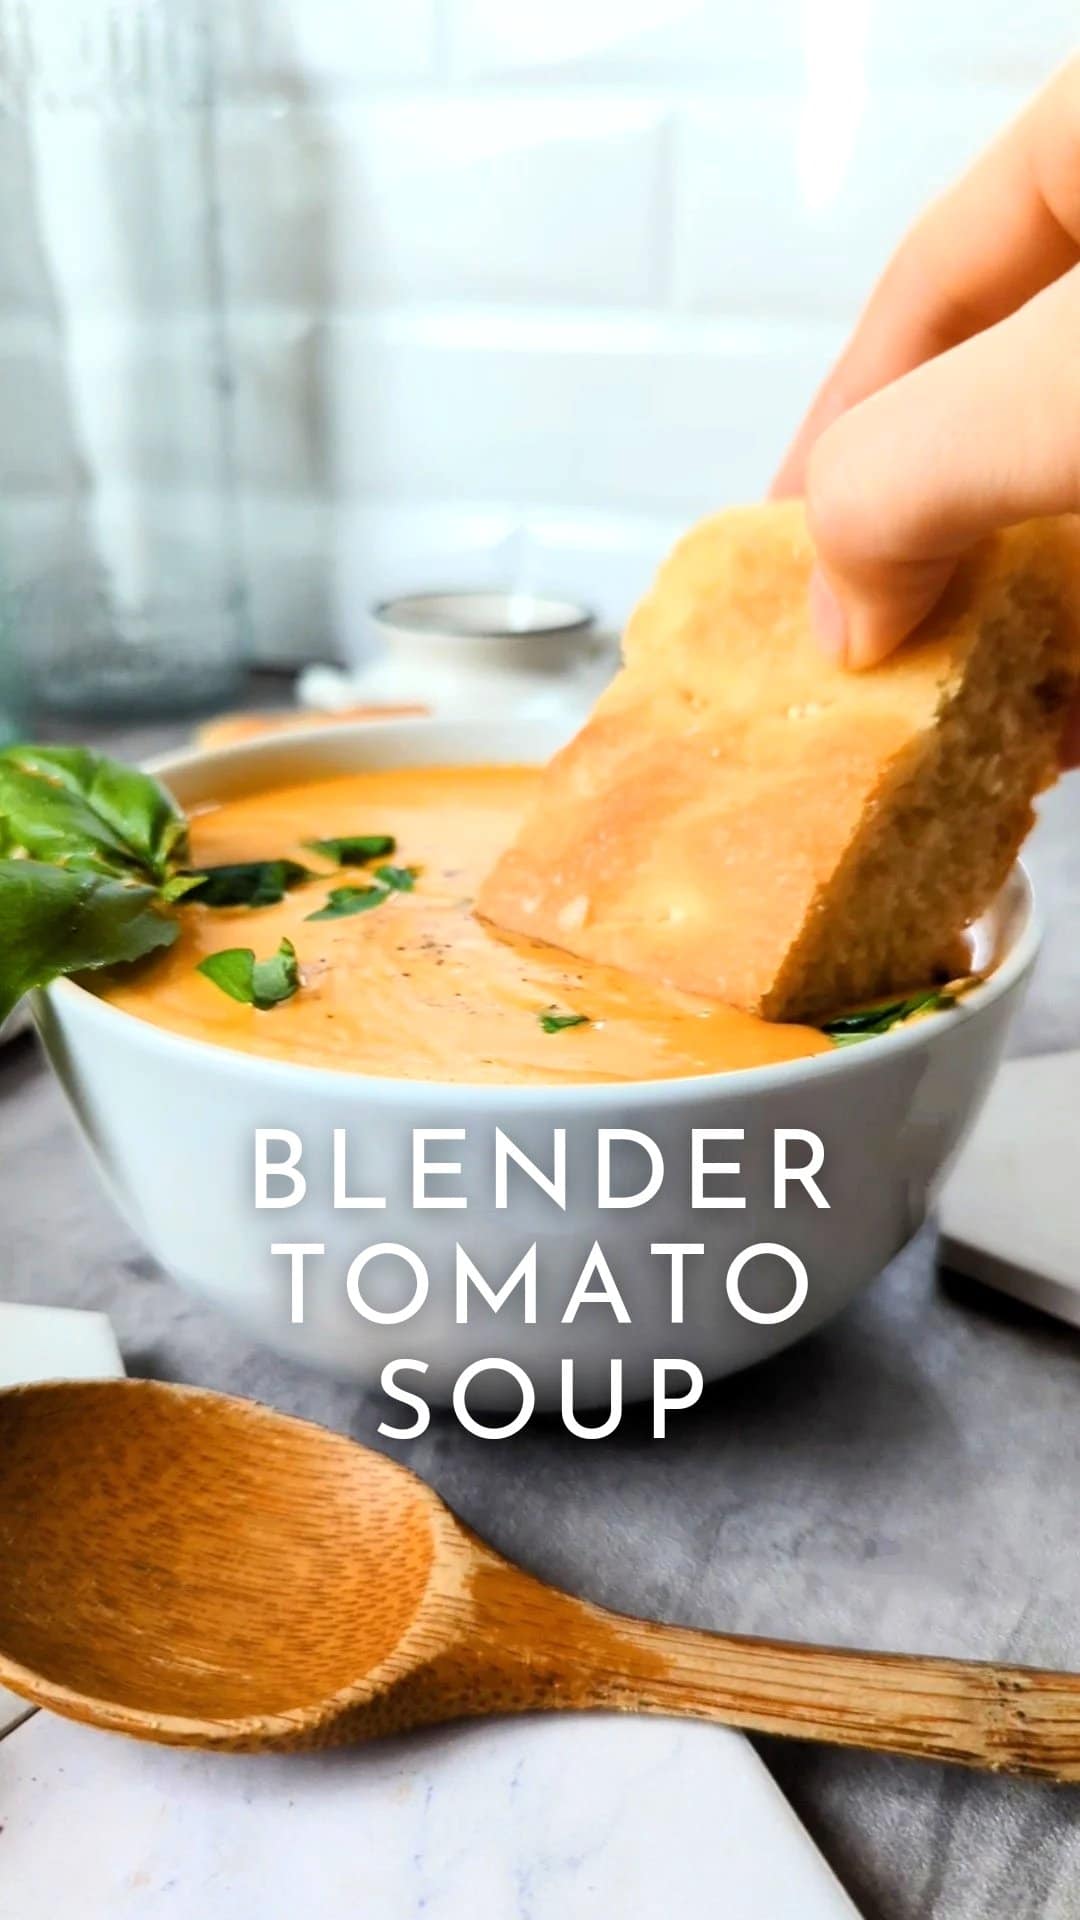 diced tomato soup in a blender creamy vegan cashew tomato soup recipe blended tomato soup creamiest vegan tomato soup recipe with bread and basil in a bowl.